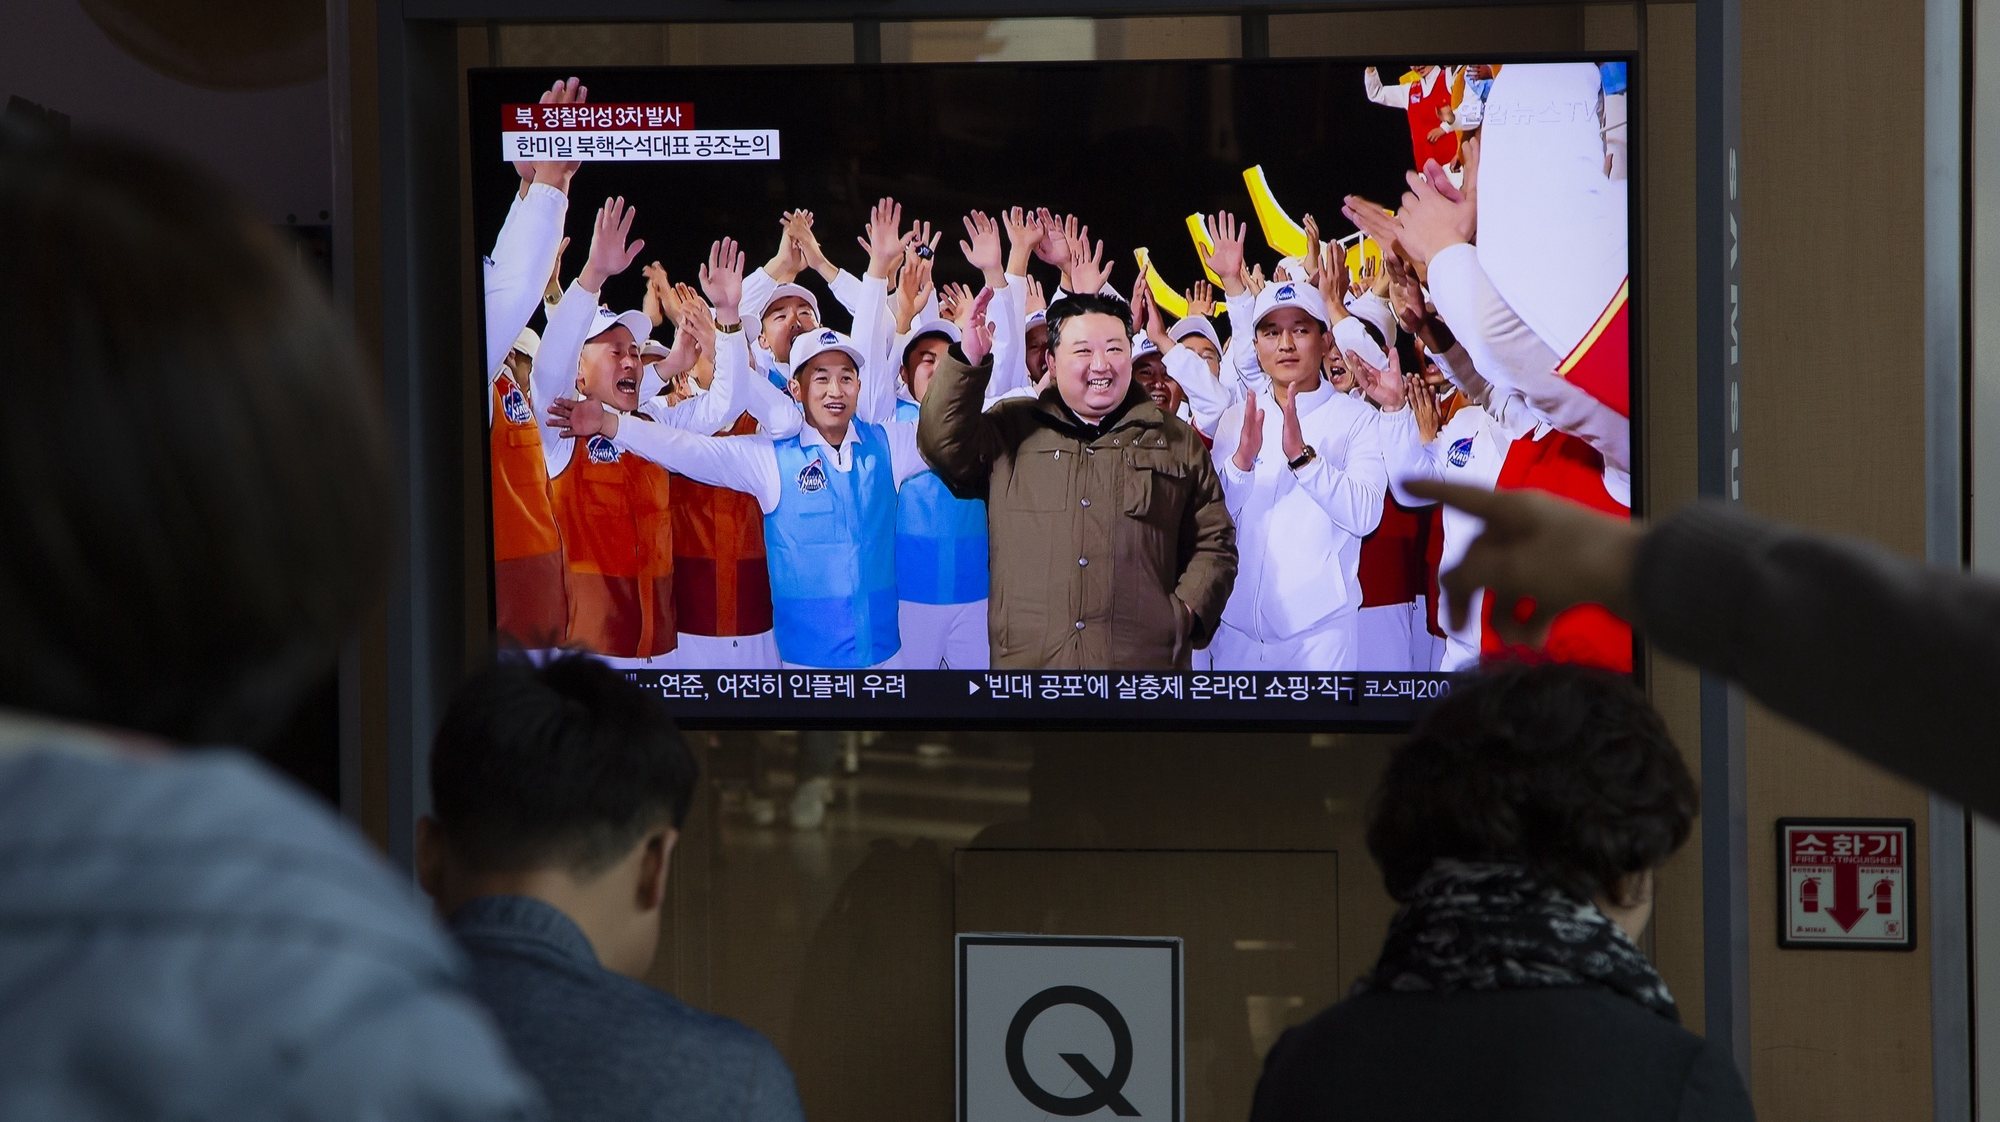 epaselect epa10988717 People watch the news at a station in Seoul, South Korea, 22 November 2023. According to South Korea&#039;s Joint Chiefs of Staff (JCS), North Korea launched a new-type carrier rocket &#039;Chollima-1&#039; with the reconnaissance satellite &#039;Malligyong-1&#039; from Sohae Satellite Launching Ground in Cholsan County, on 21 November 2023. According to KCNA, North Korea&#039;s National Aerospace Technology Administration (NATA) successfully launched &#039;Chollima-1&#039; and &#039;accurately put the reconnaissance satellite &#039;Malligyong-1&#039; on its orbit at 22:54:13, 705s after the launch&#039;.  EPA/JEON HEON-KYUN